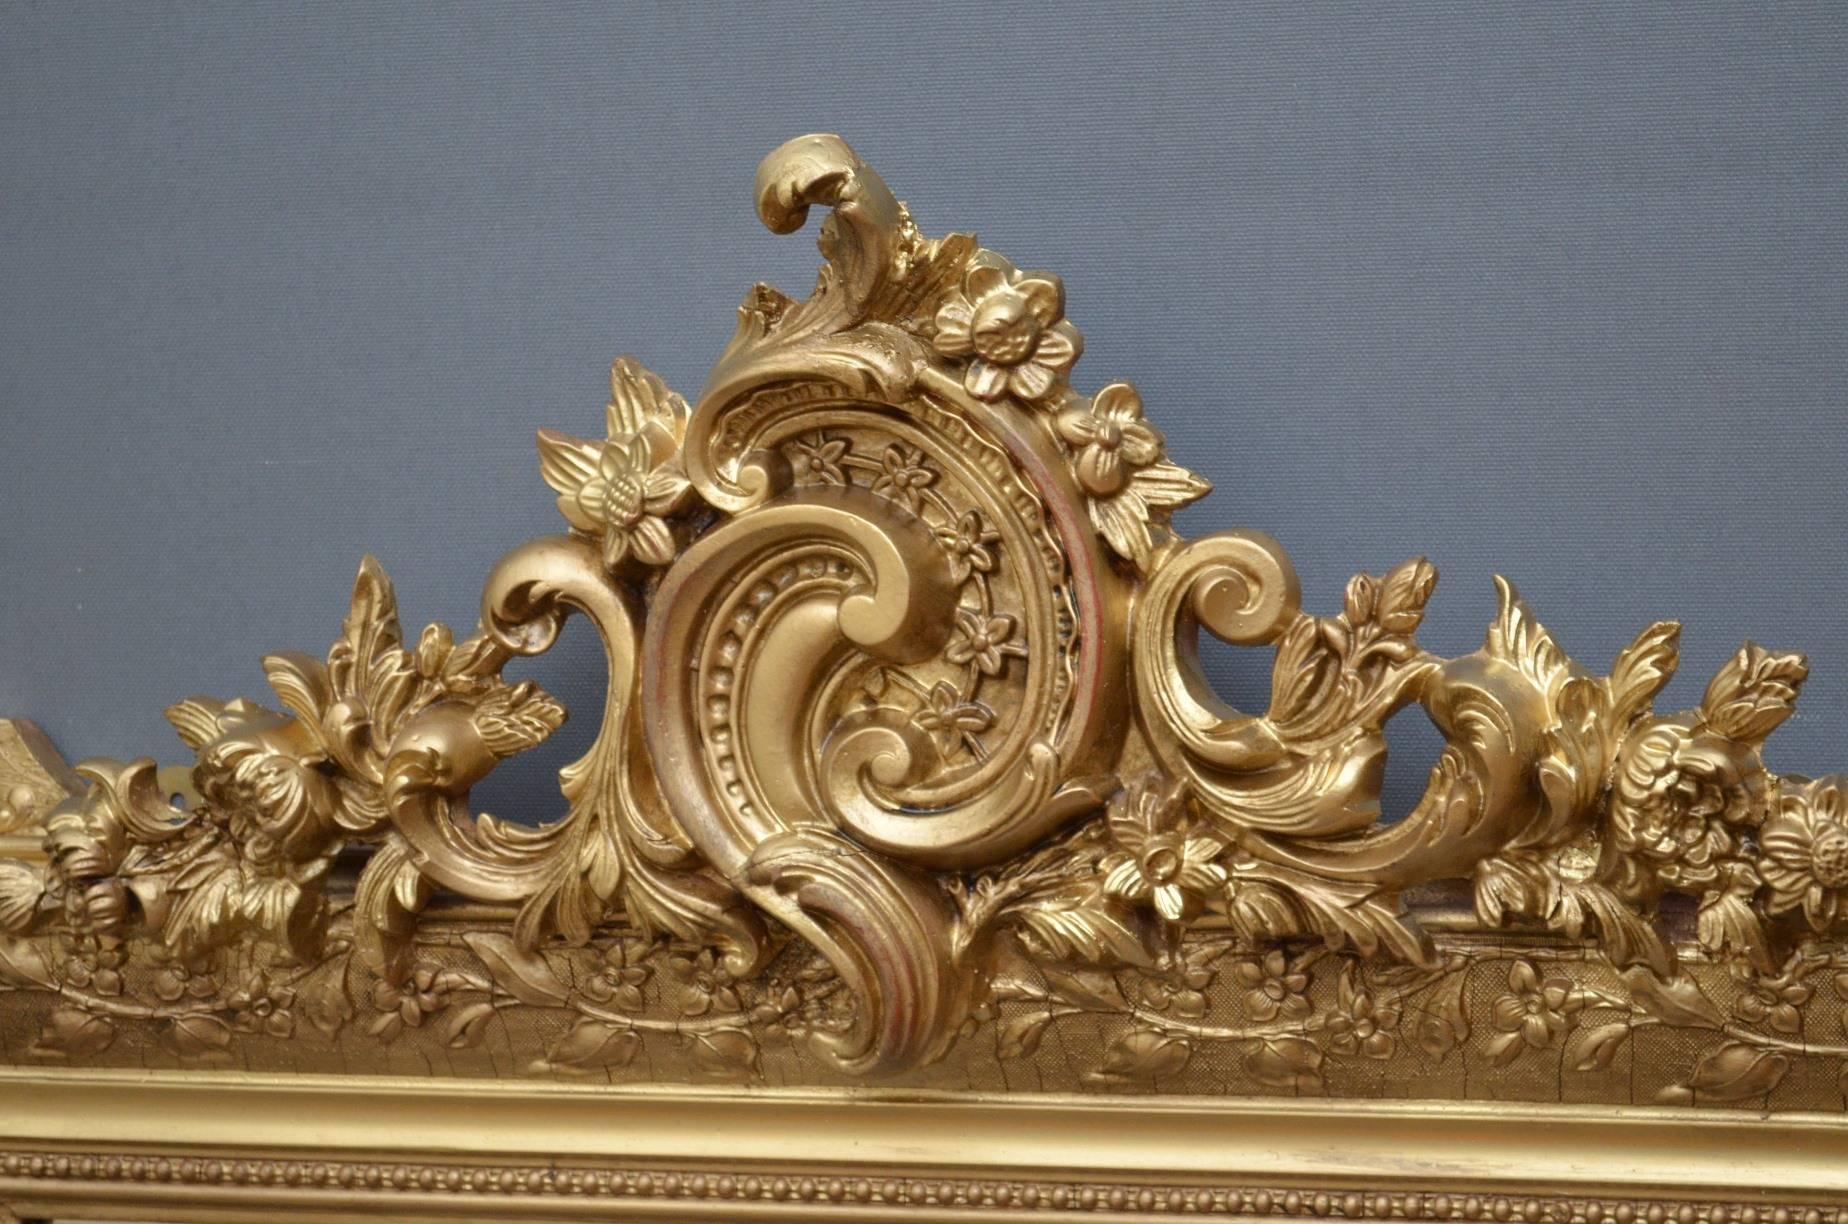 K0119 stylish and very elegant, 19th century, giltwood wall mirror of small proportions, having exceptional cresting with scrolls, flowers and leaves to top, and original mirror plate in finely carved frame. This attractive overmantel has been